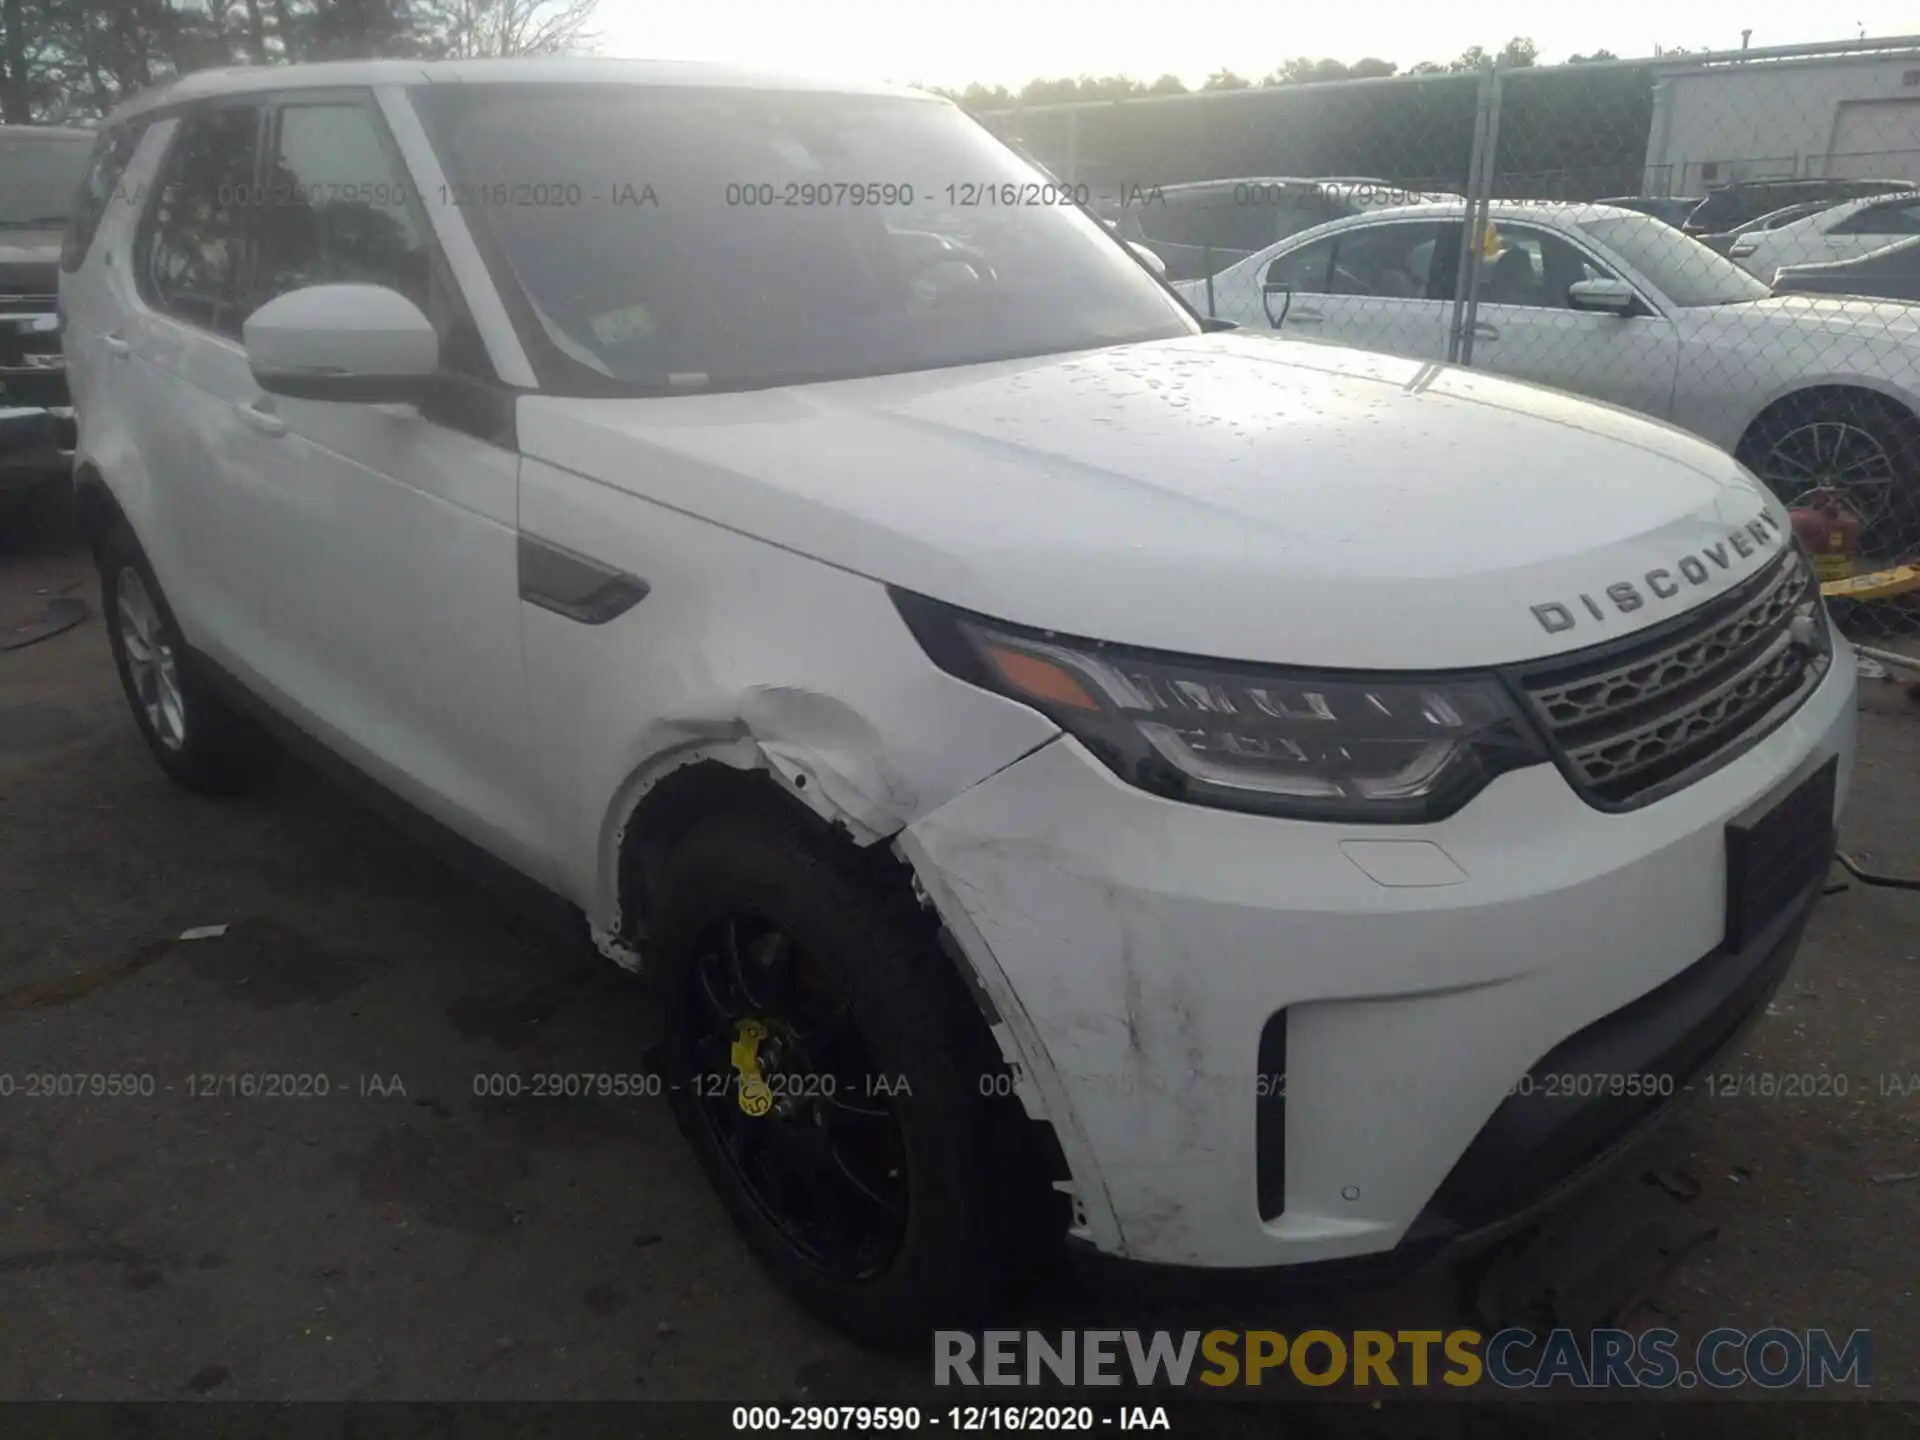 6 Photograph of a damaged car SALRG2RV7L2425164 LAND ROVER DISCOVERY 2020